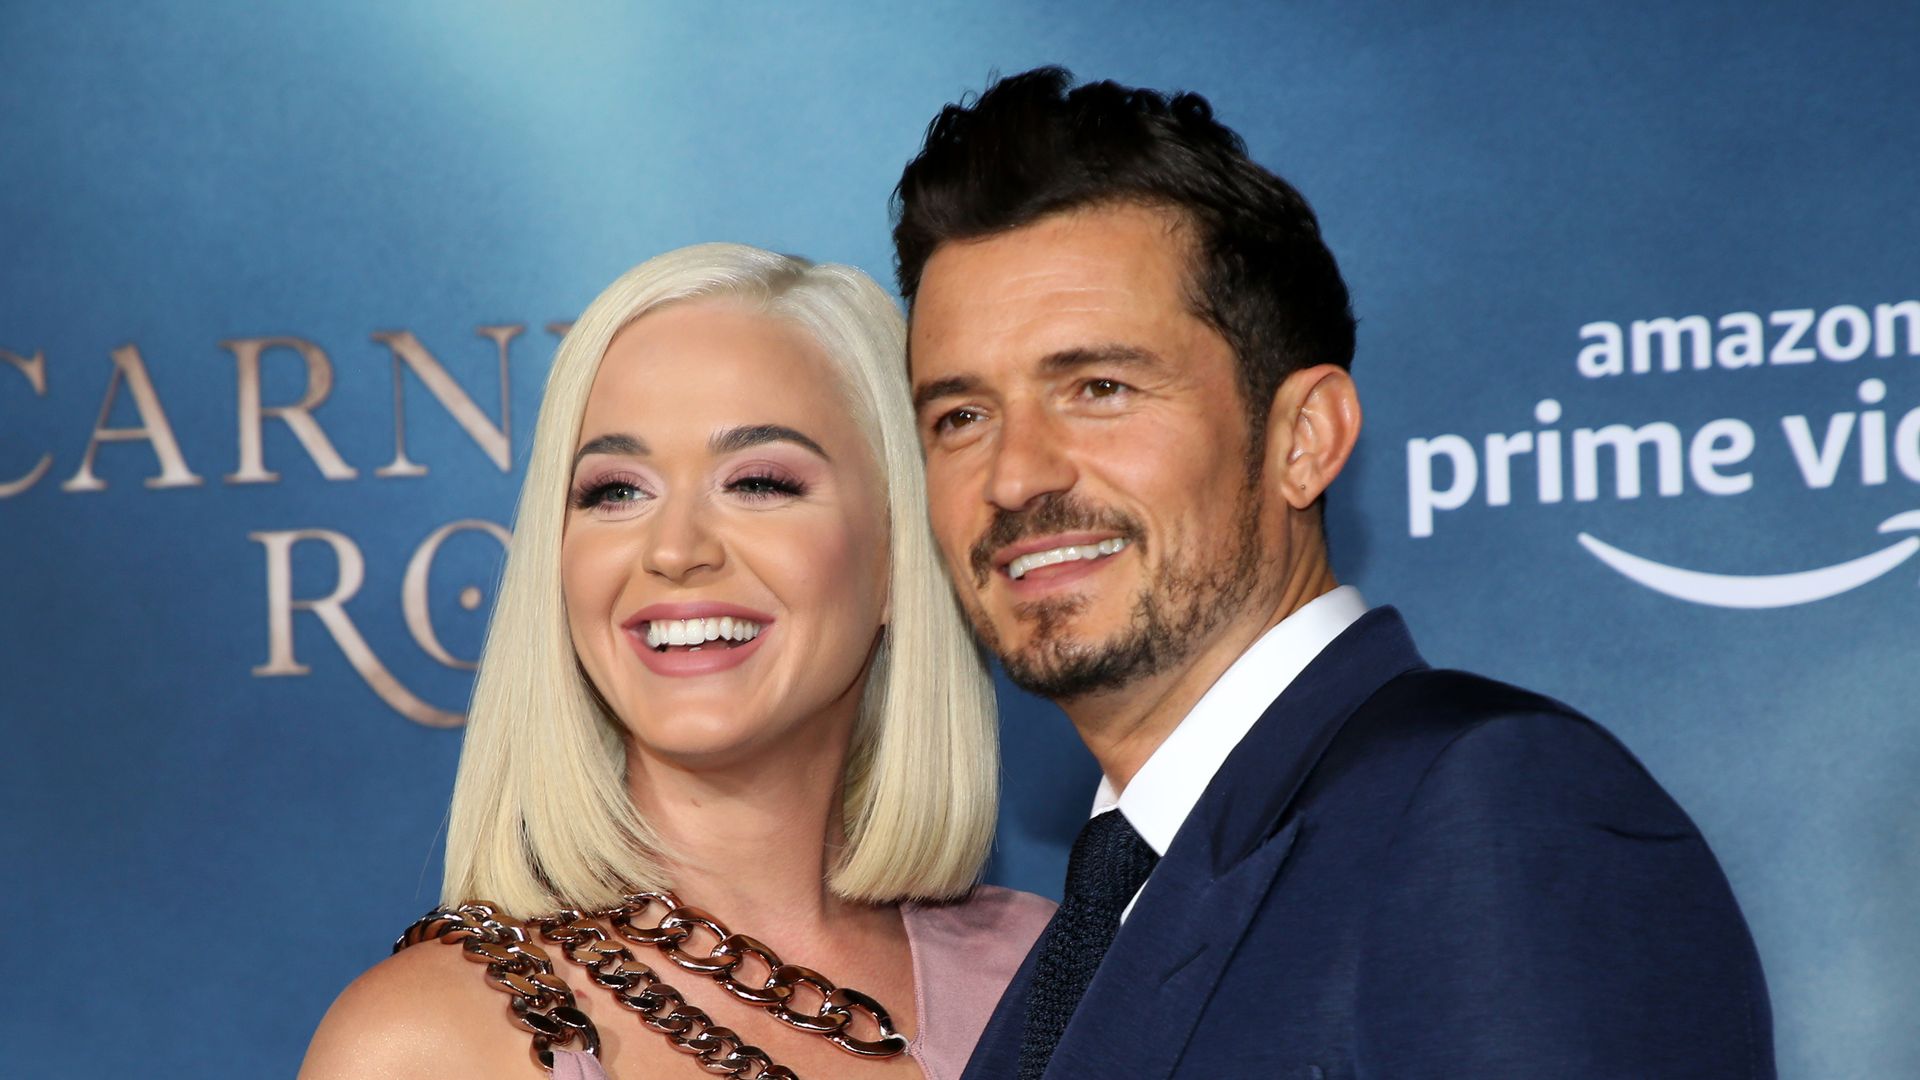 Katy Perry and Orlando Bloom attend the LA premiere of Amazon's "Carnival Row" at TCL Chinese Theatre on August 21, 2019 in Hollywood, California